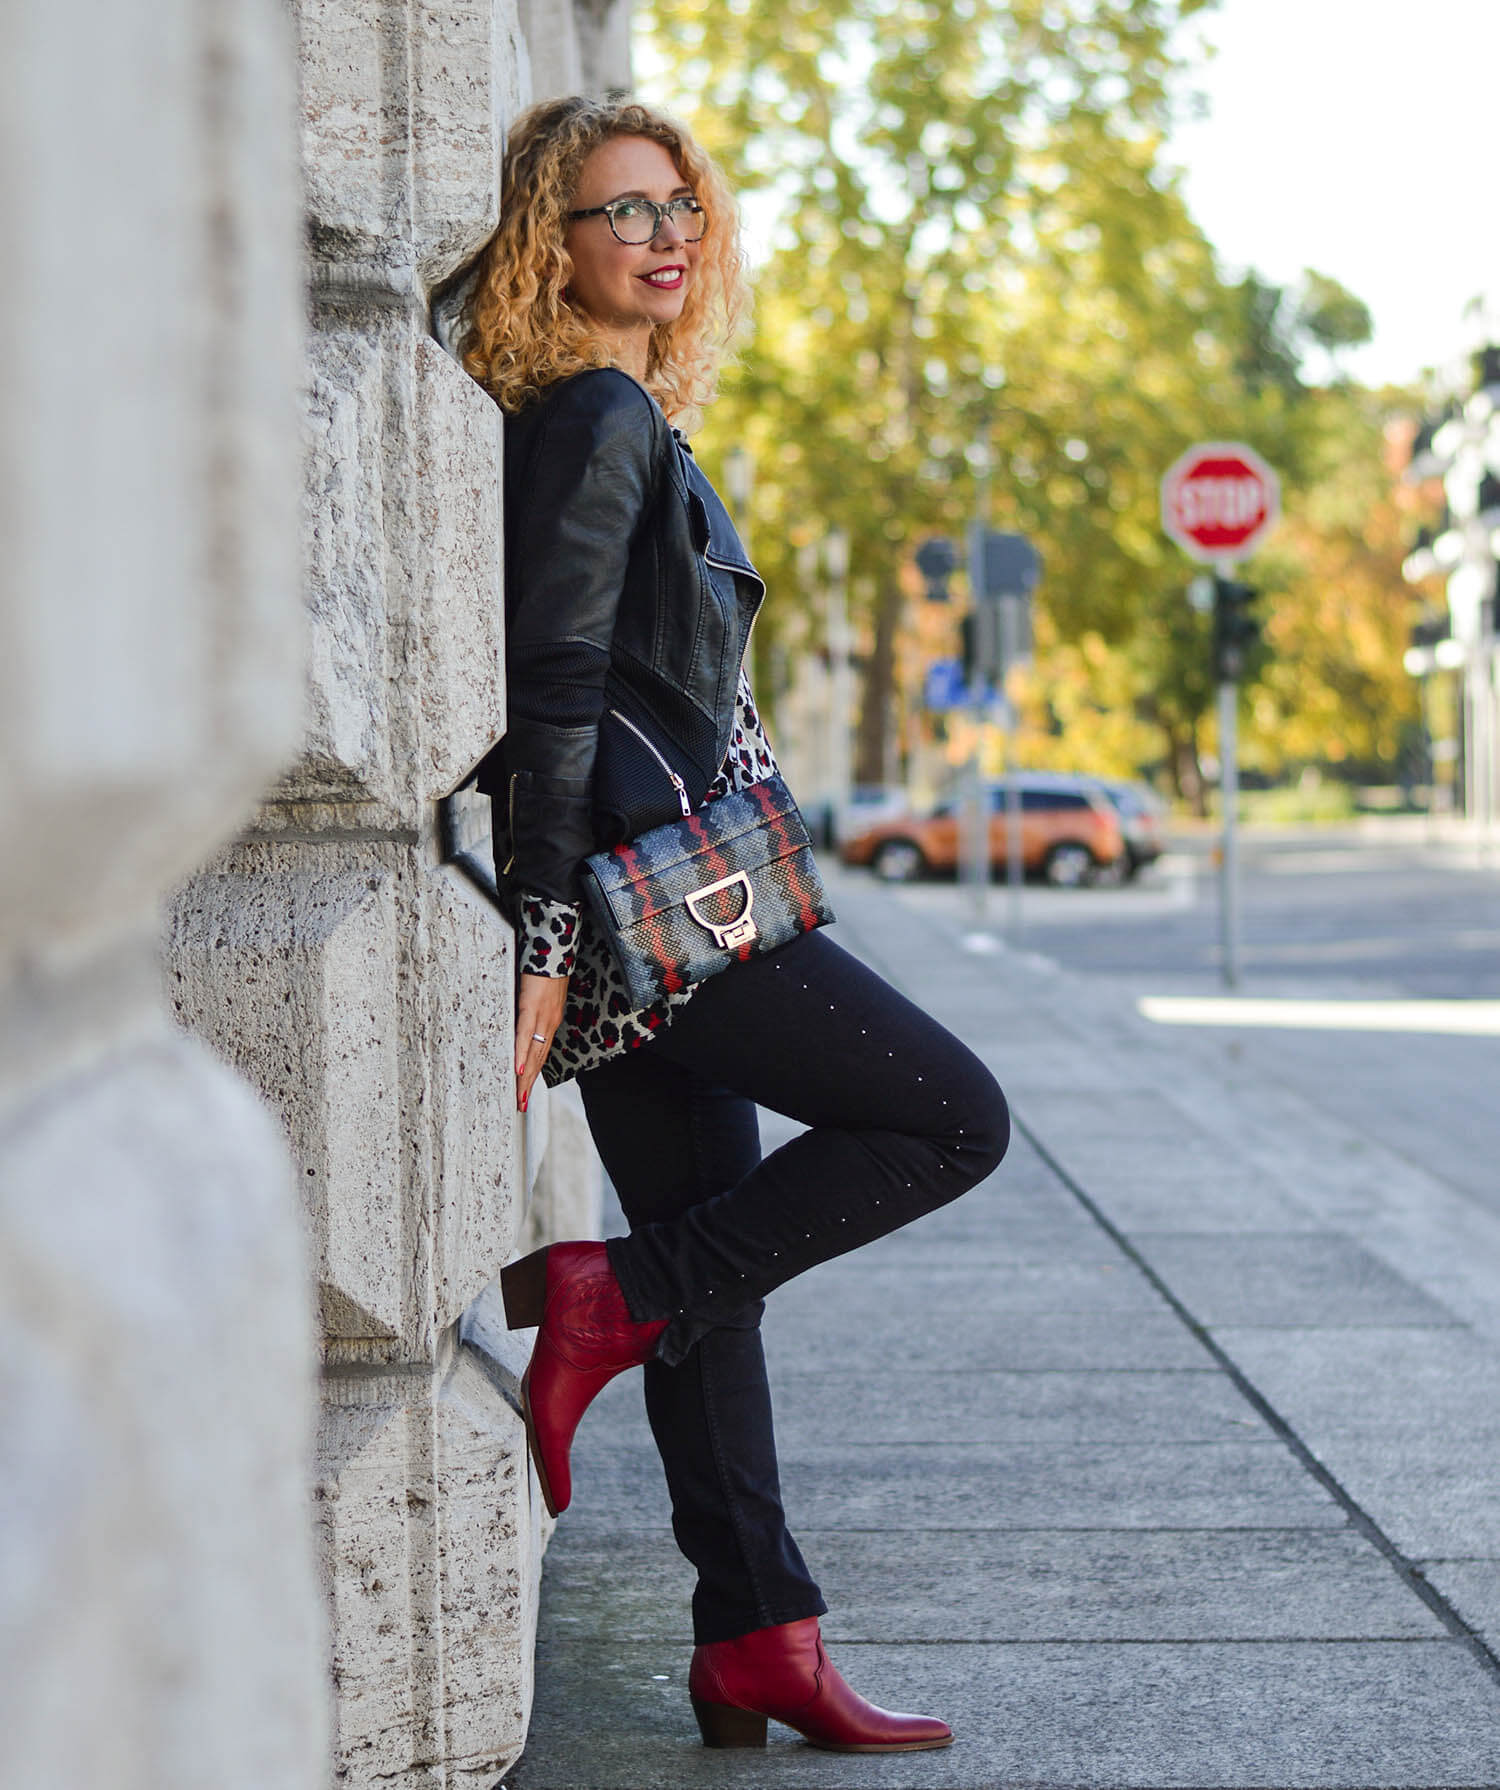 Animal-Print-Studded-Denim-Leather-Jacket-Cowboy-Boots-Fall-Outfit-kationette-fashionblogger-germany